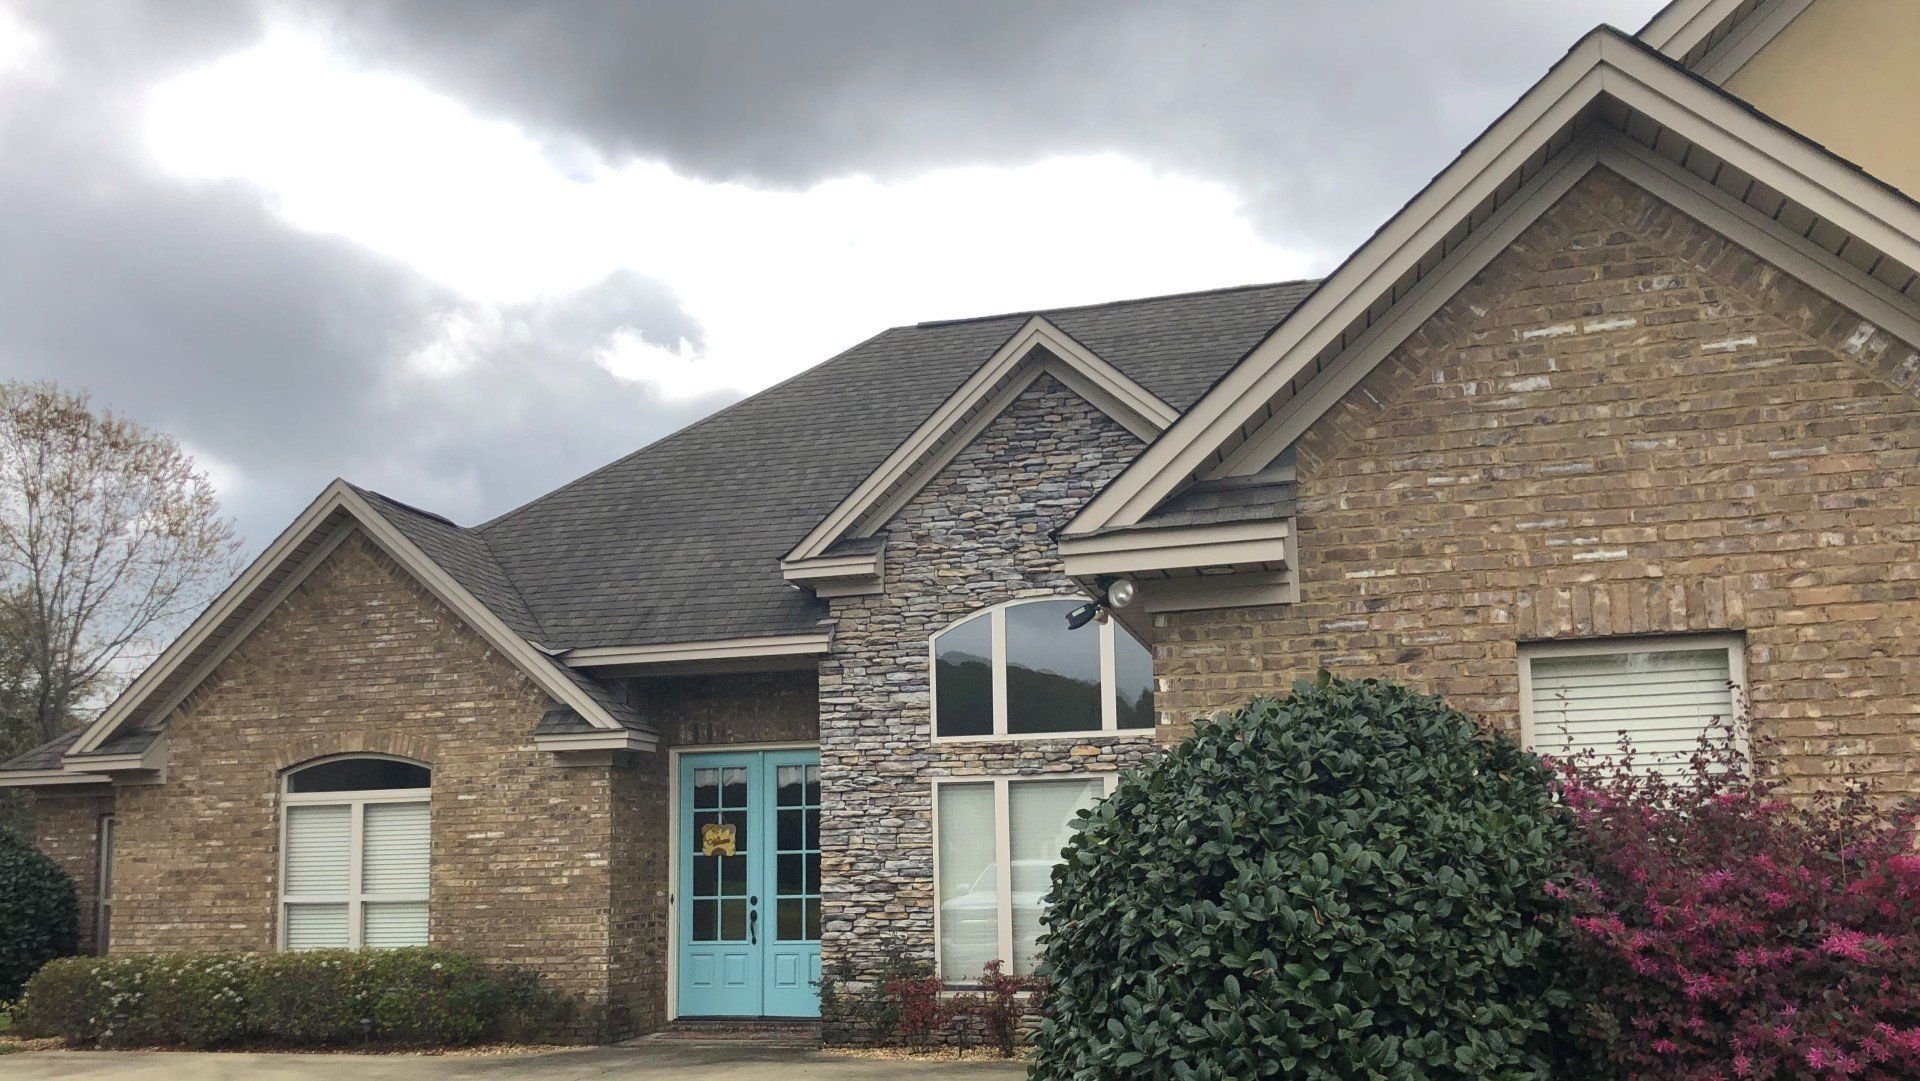 Window Tint service in Prattville AL - The heat and bright Sun passing thru the glass was intense inside of this home before SPF Tint was installed in Prattville, AL